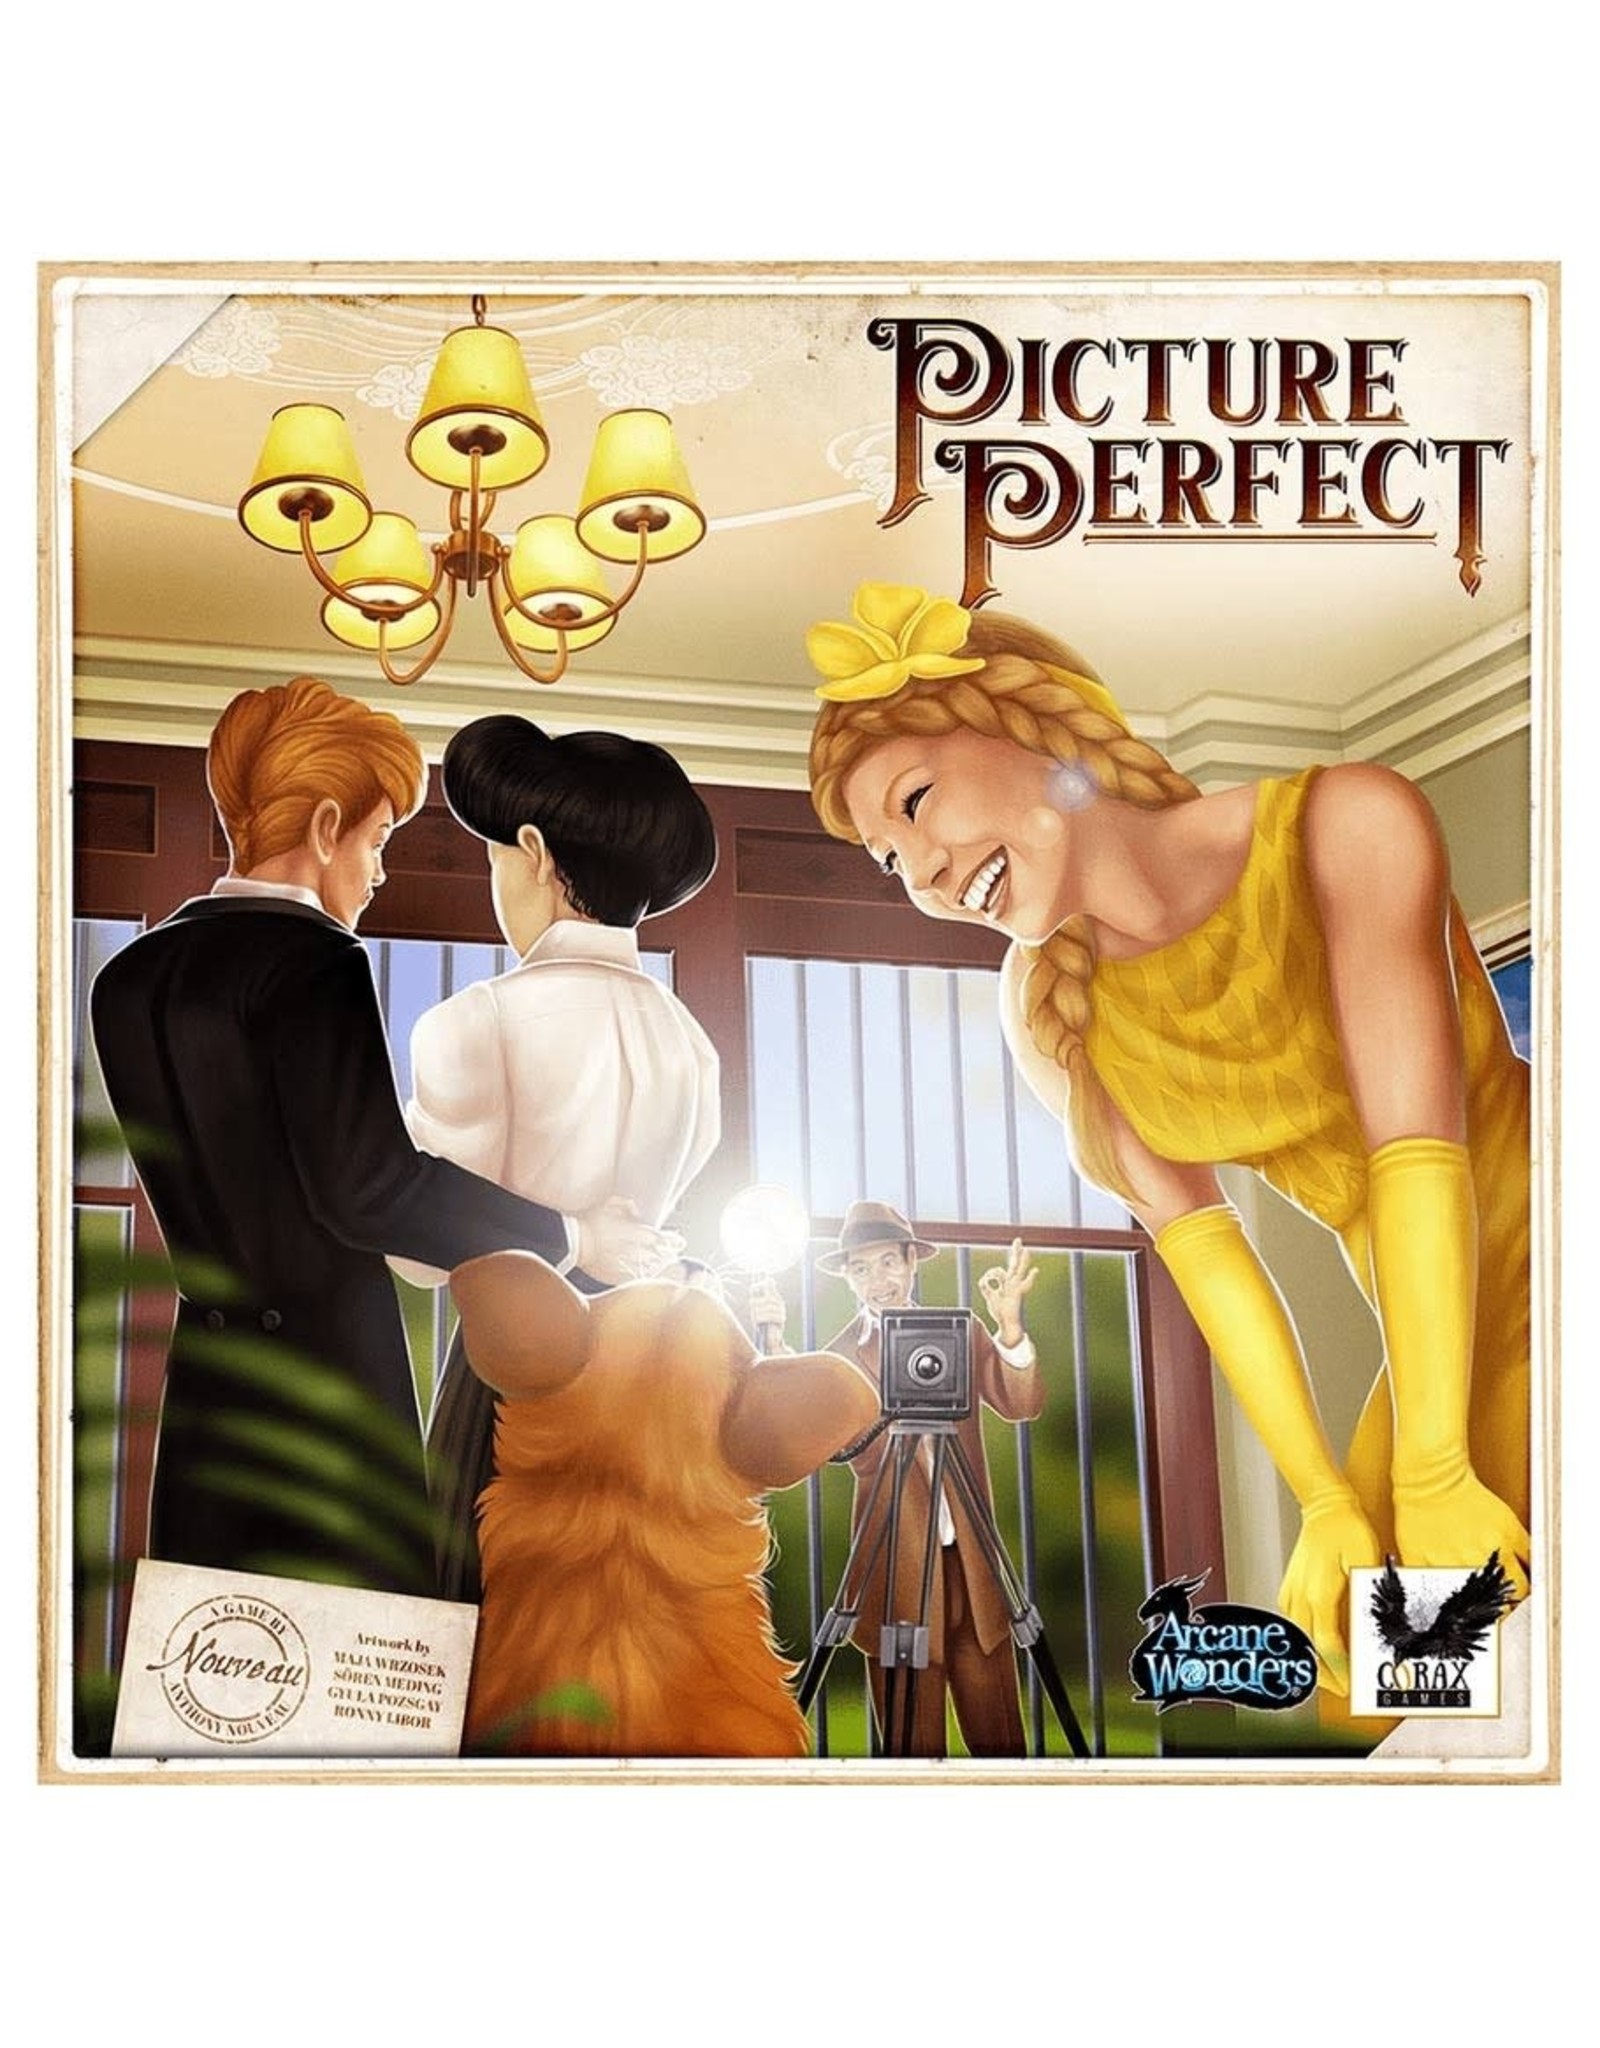 Arcane Wonders Picture Perfect